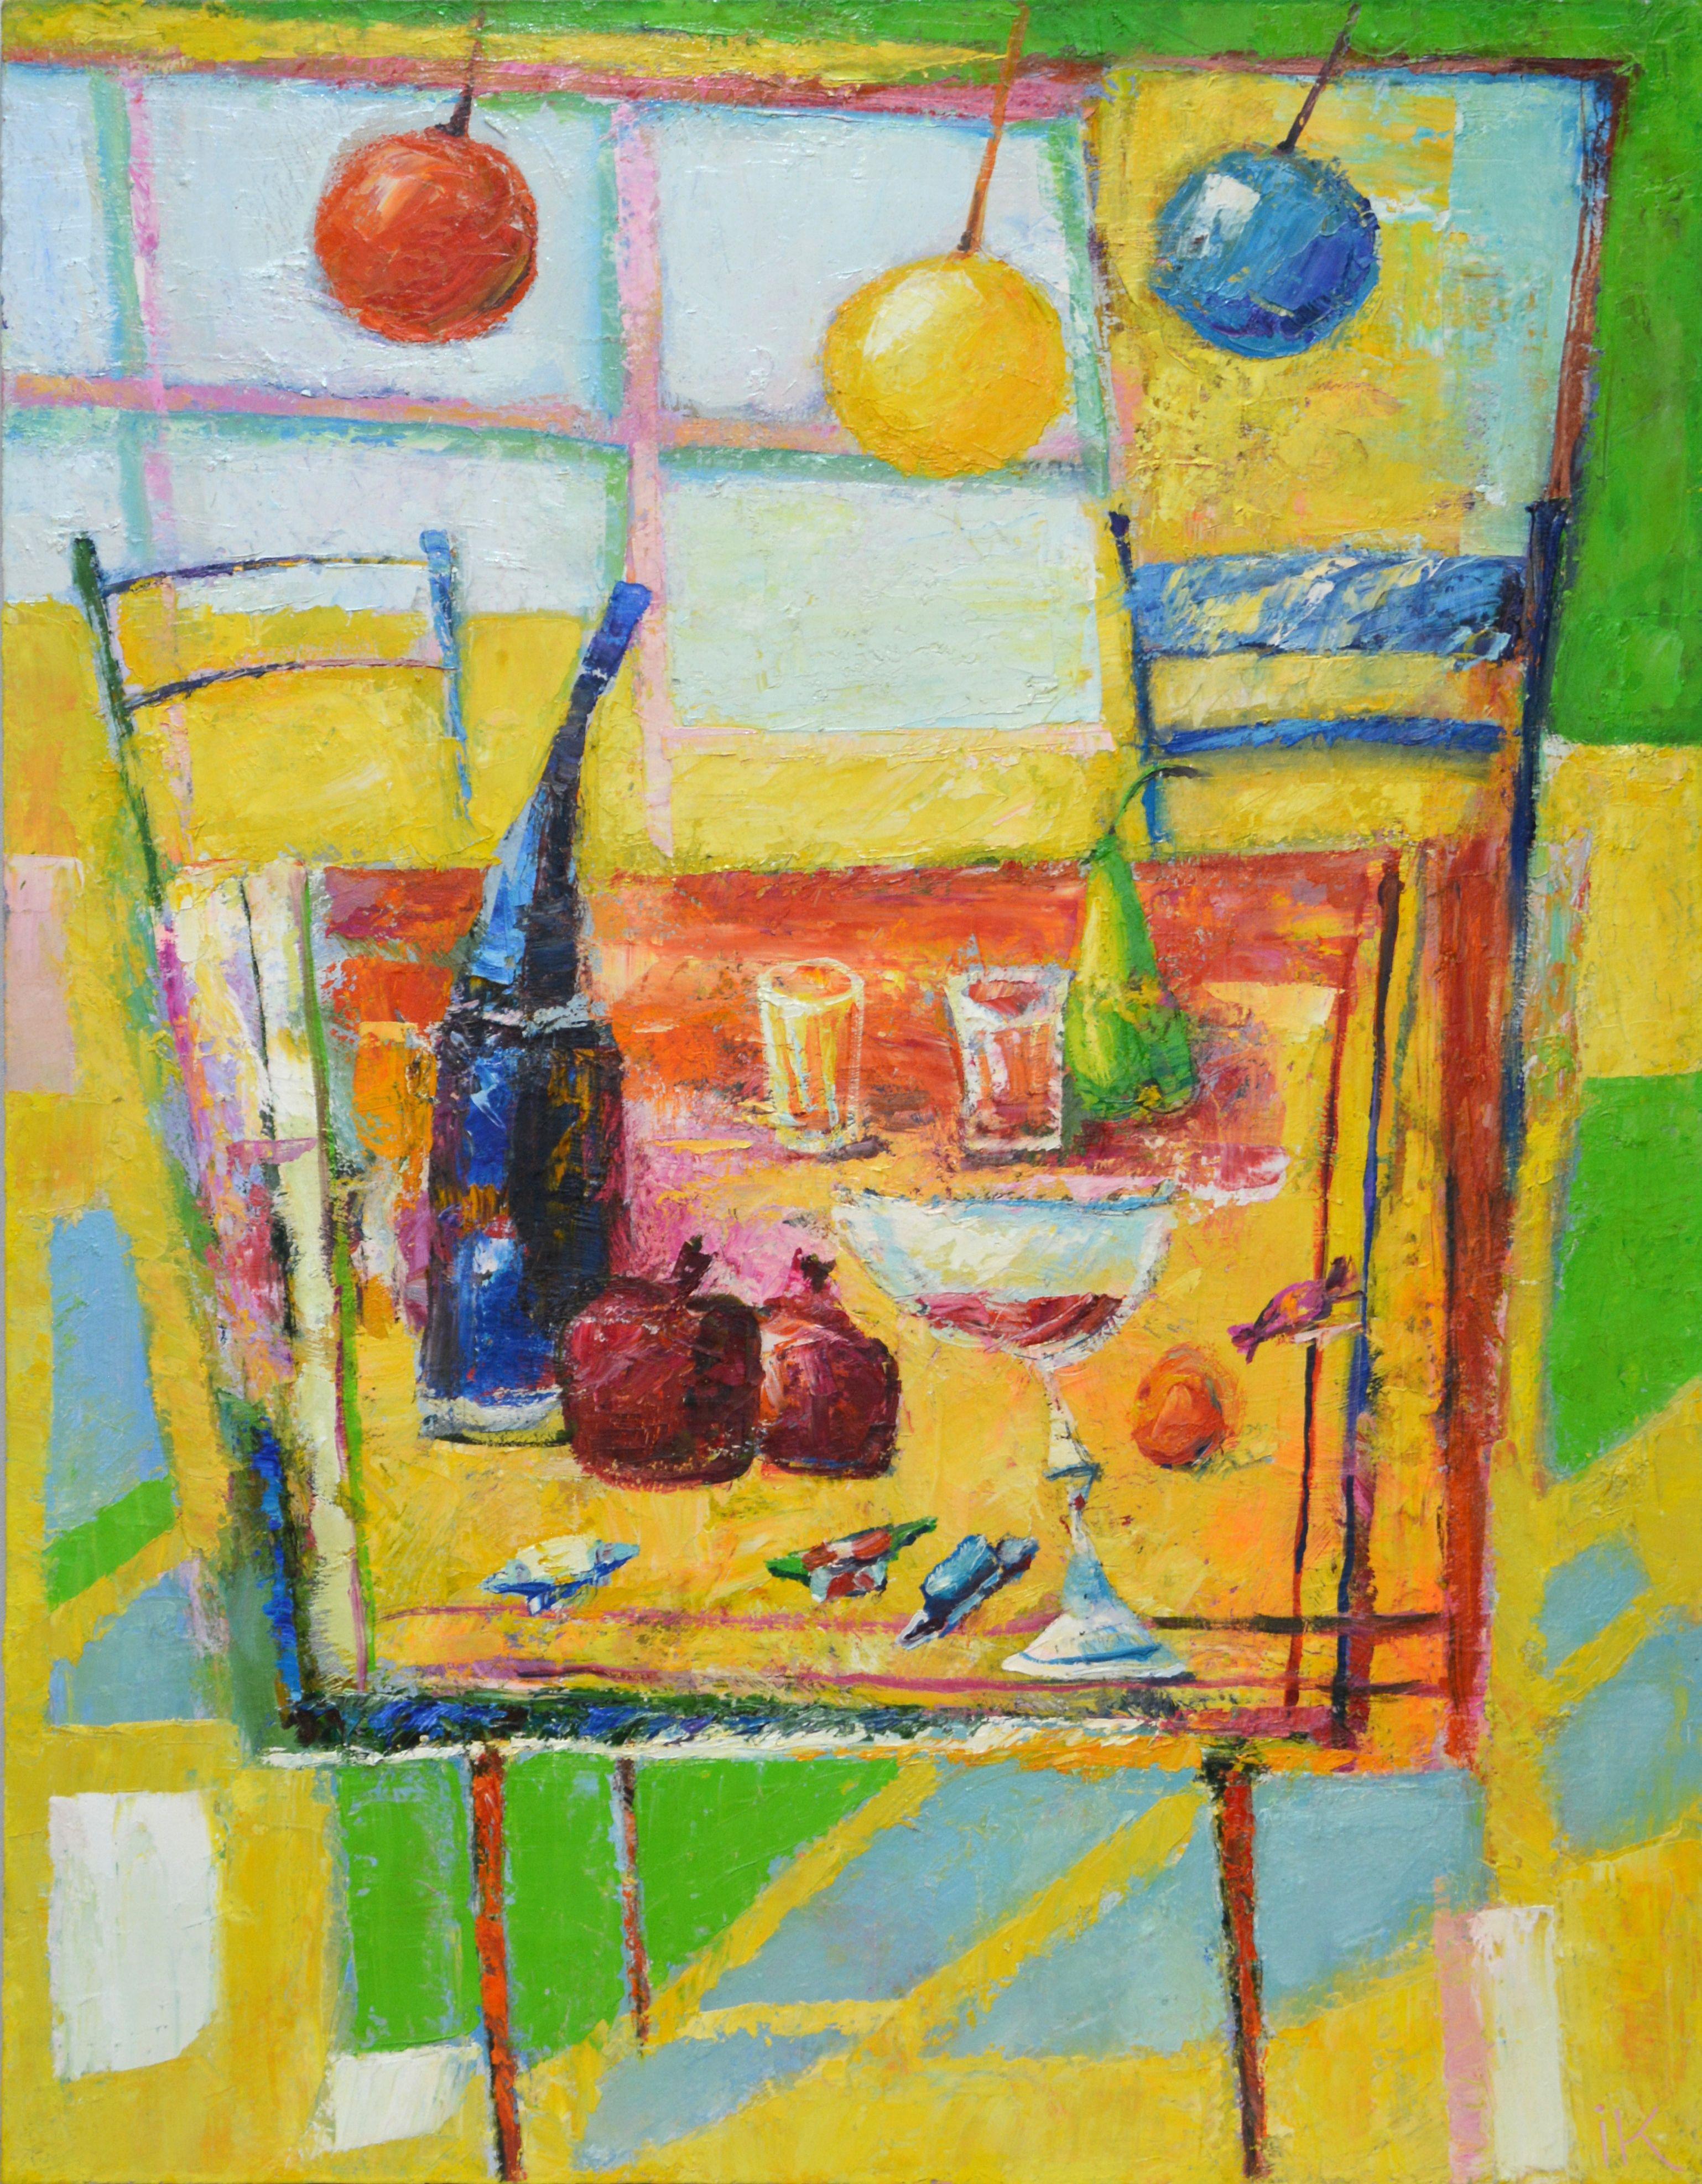 Norwegian still life in the interior. On the table is a bottle, a glass of wine, pomegranates, sweets, a pear. A window, chairs, a lamp complete the composition. The painting was painted expressively using a spatula.  Part of an ongoing series of